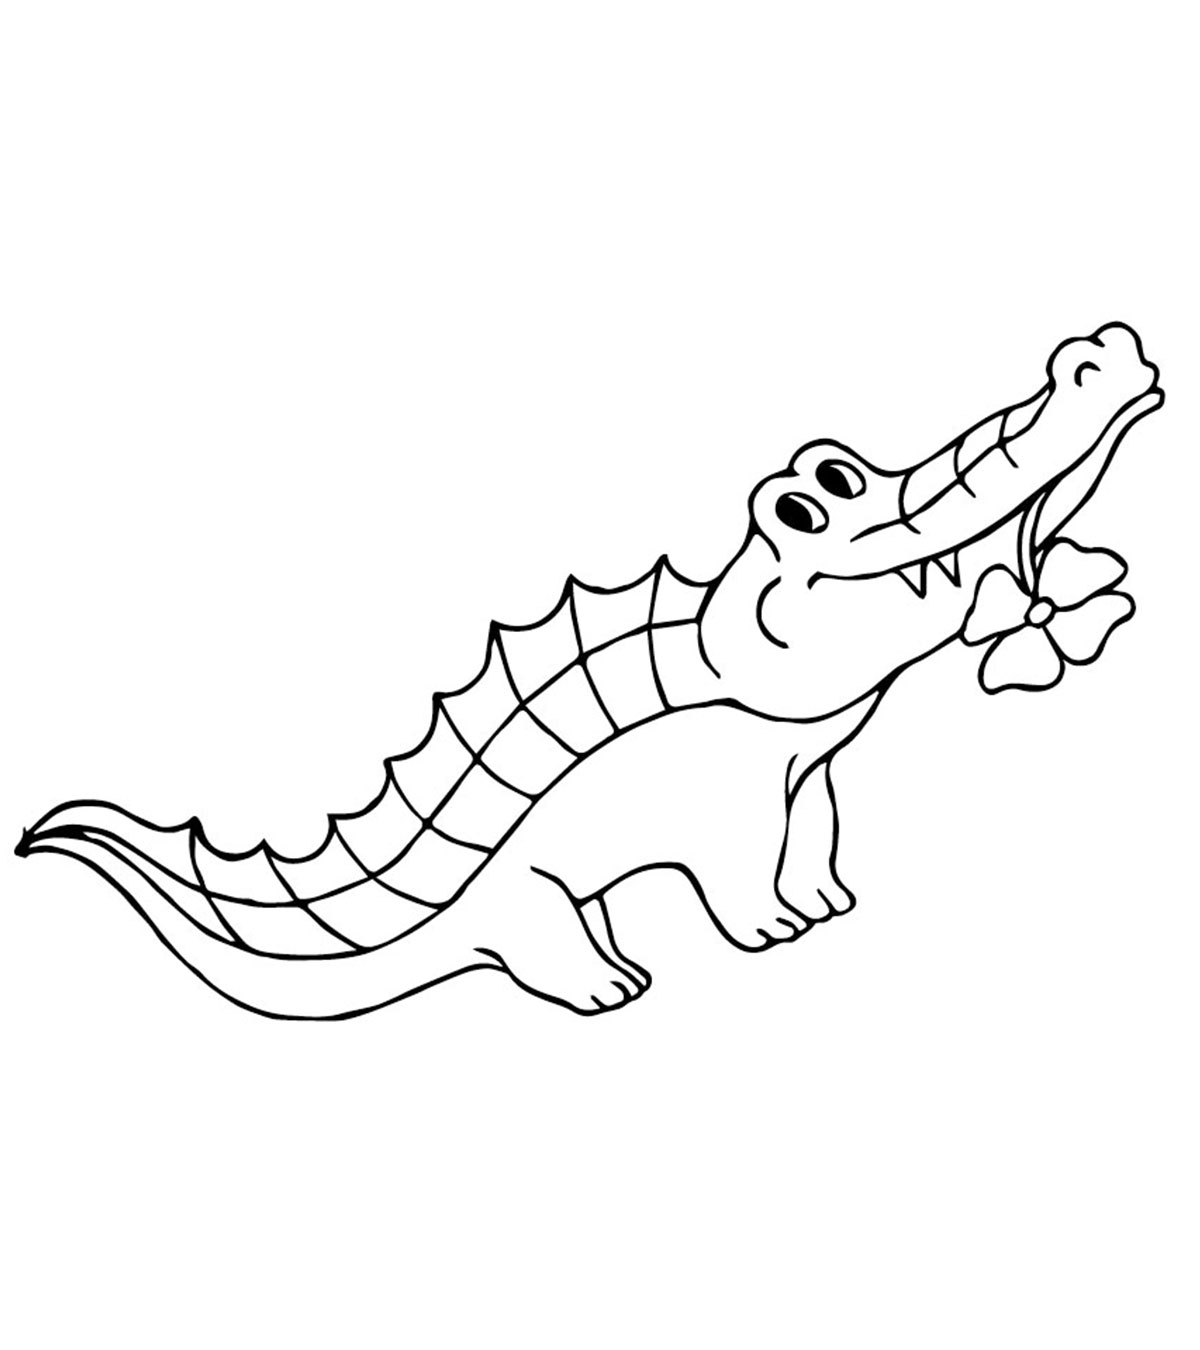 Top 25 Alligator Coloring Pages Your Toddler Will Love To Color_image